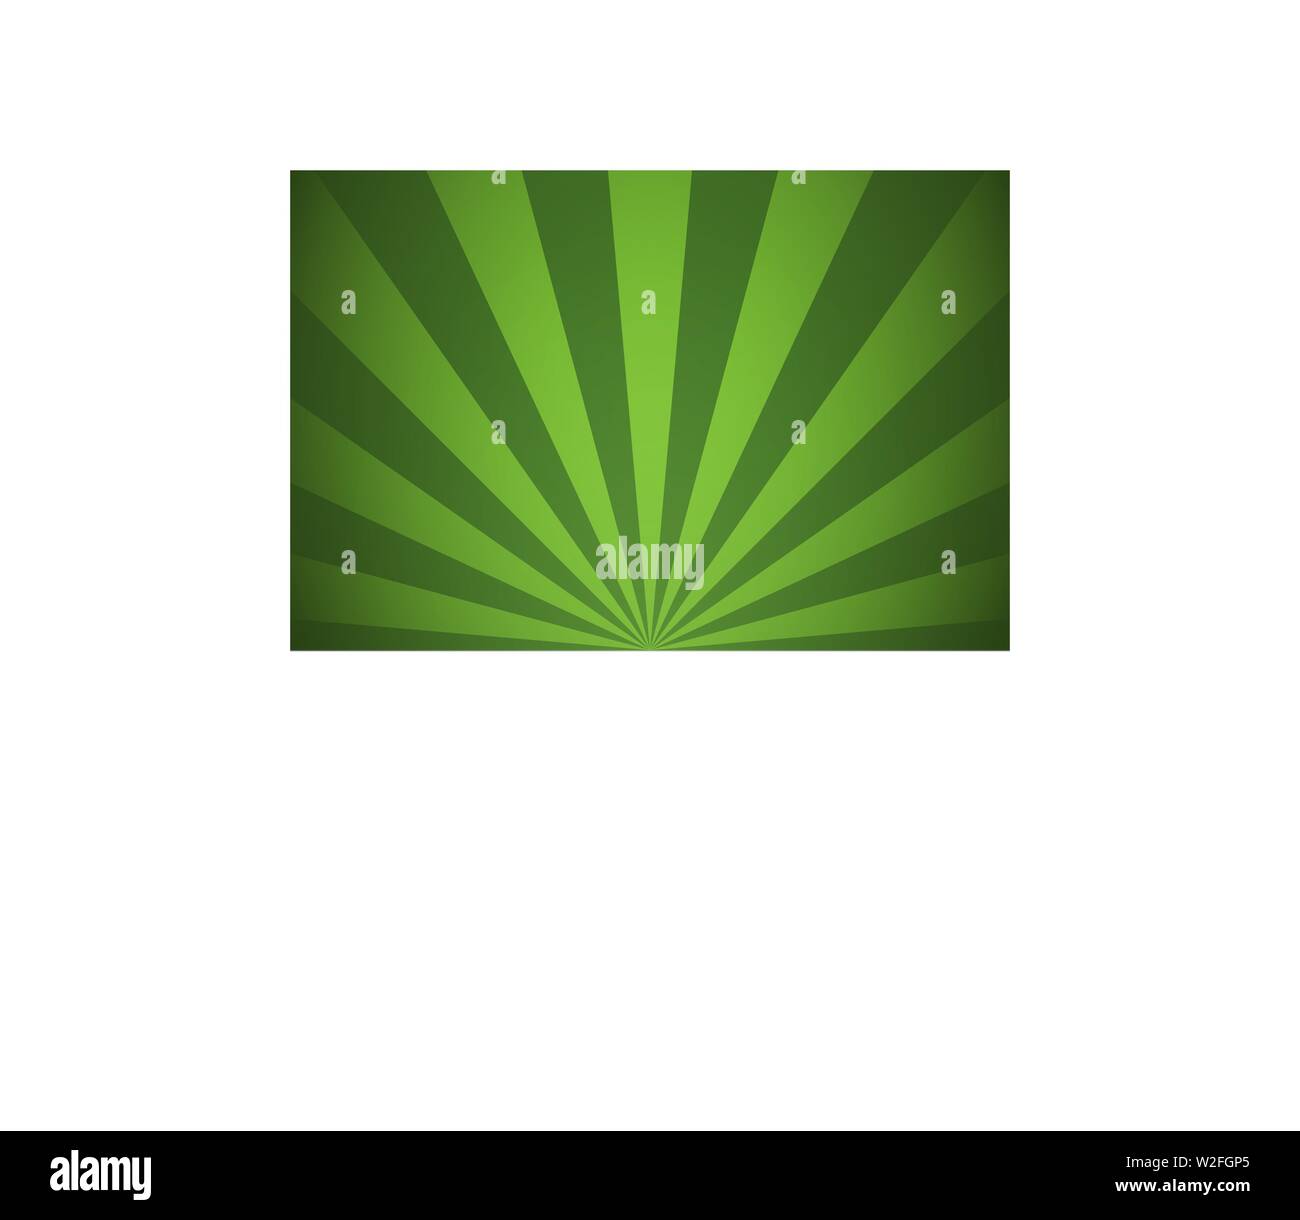 Green beams and rays abstract radial lines background vector illustration Stock Vector